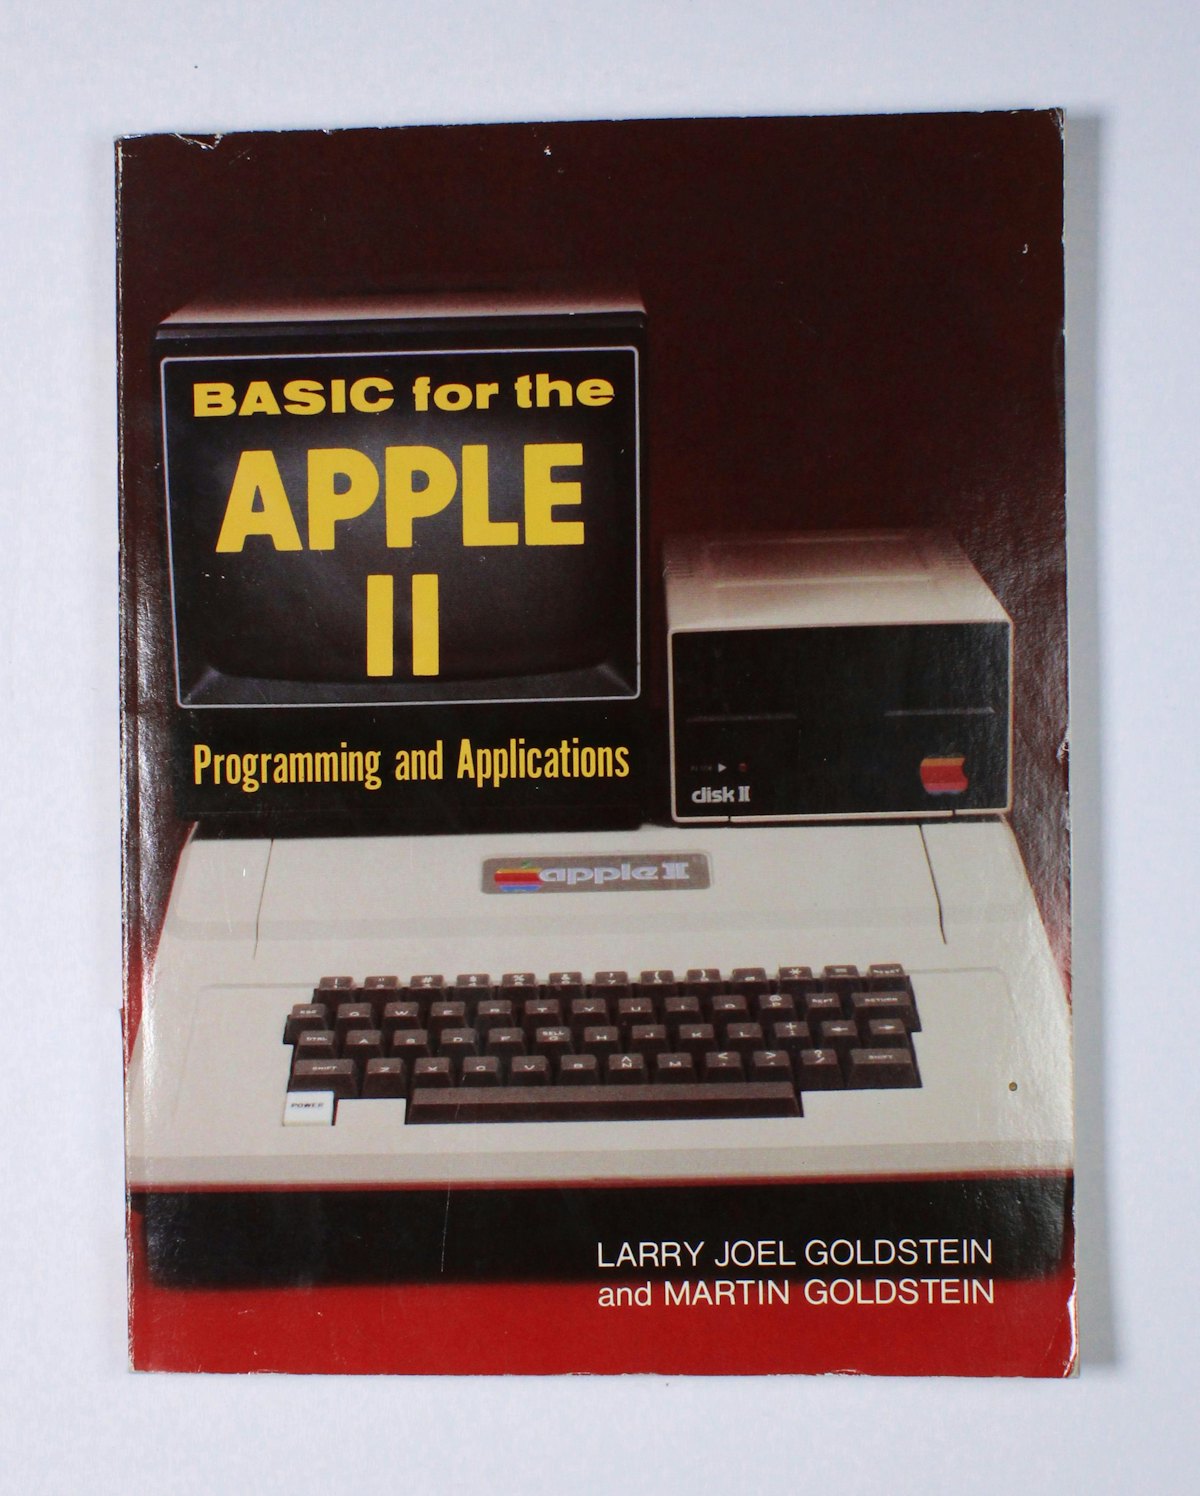 BASIC for the Apple II: Programming and Applications